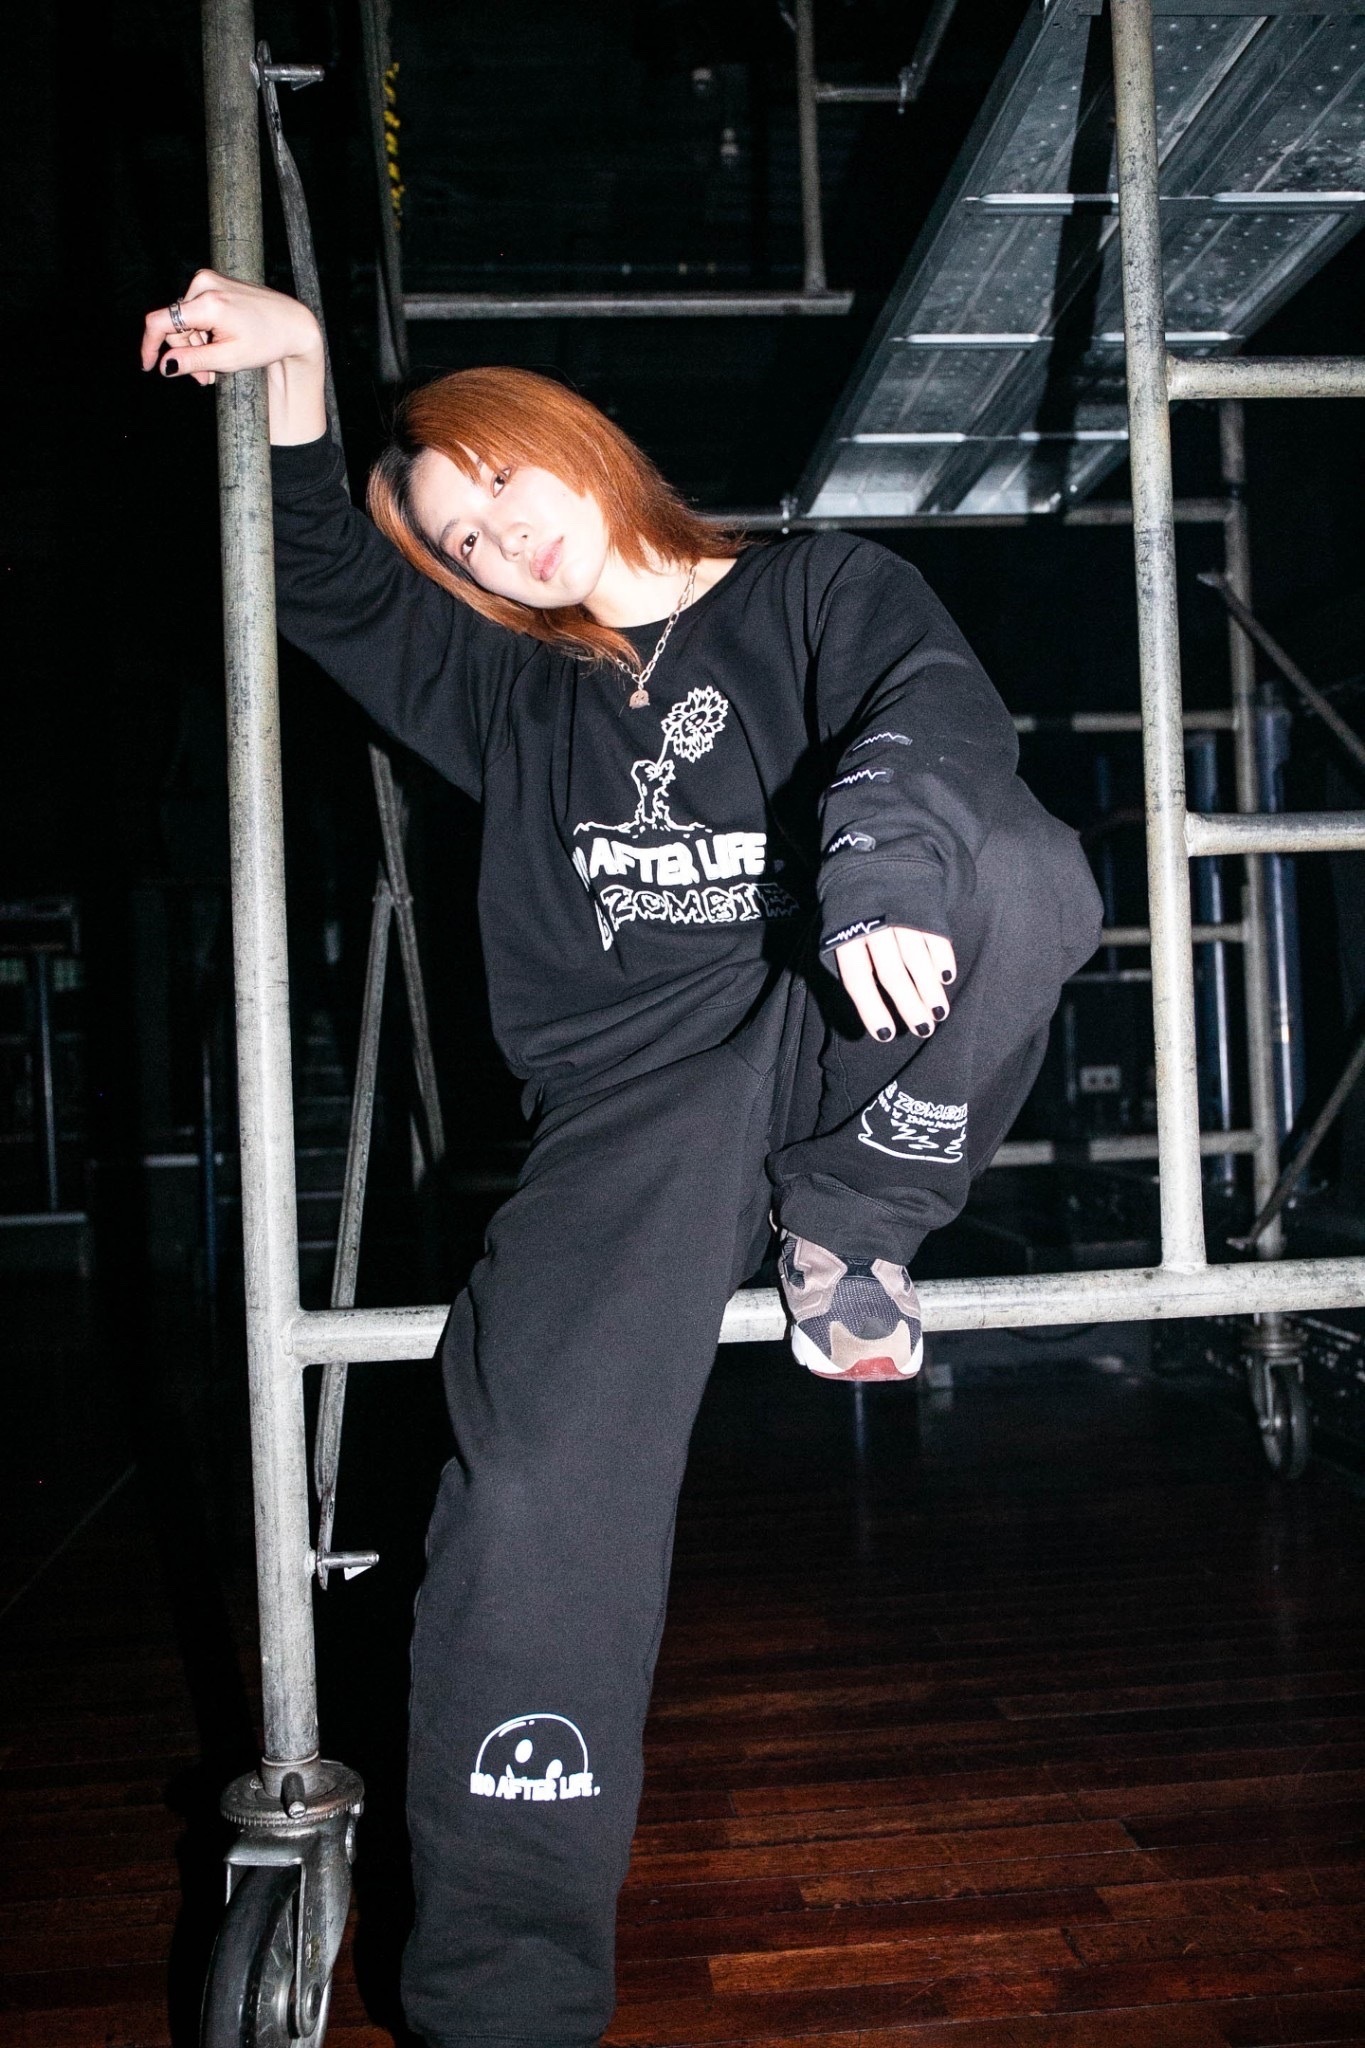 「NO AFTER LIFE, BE ZOMBIE」sweat set up